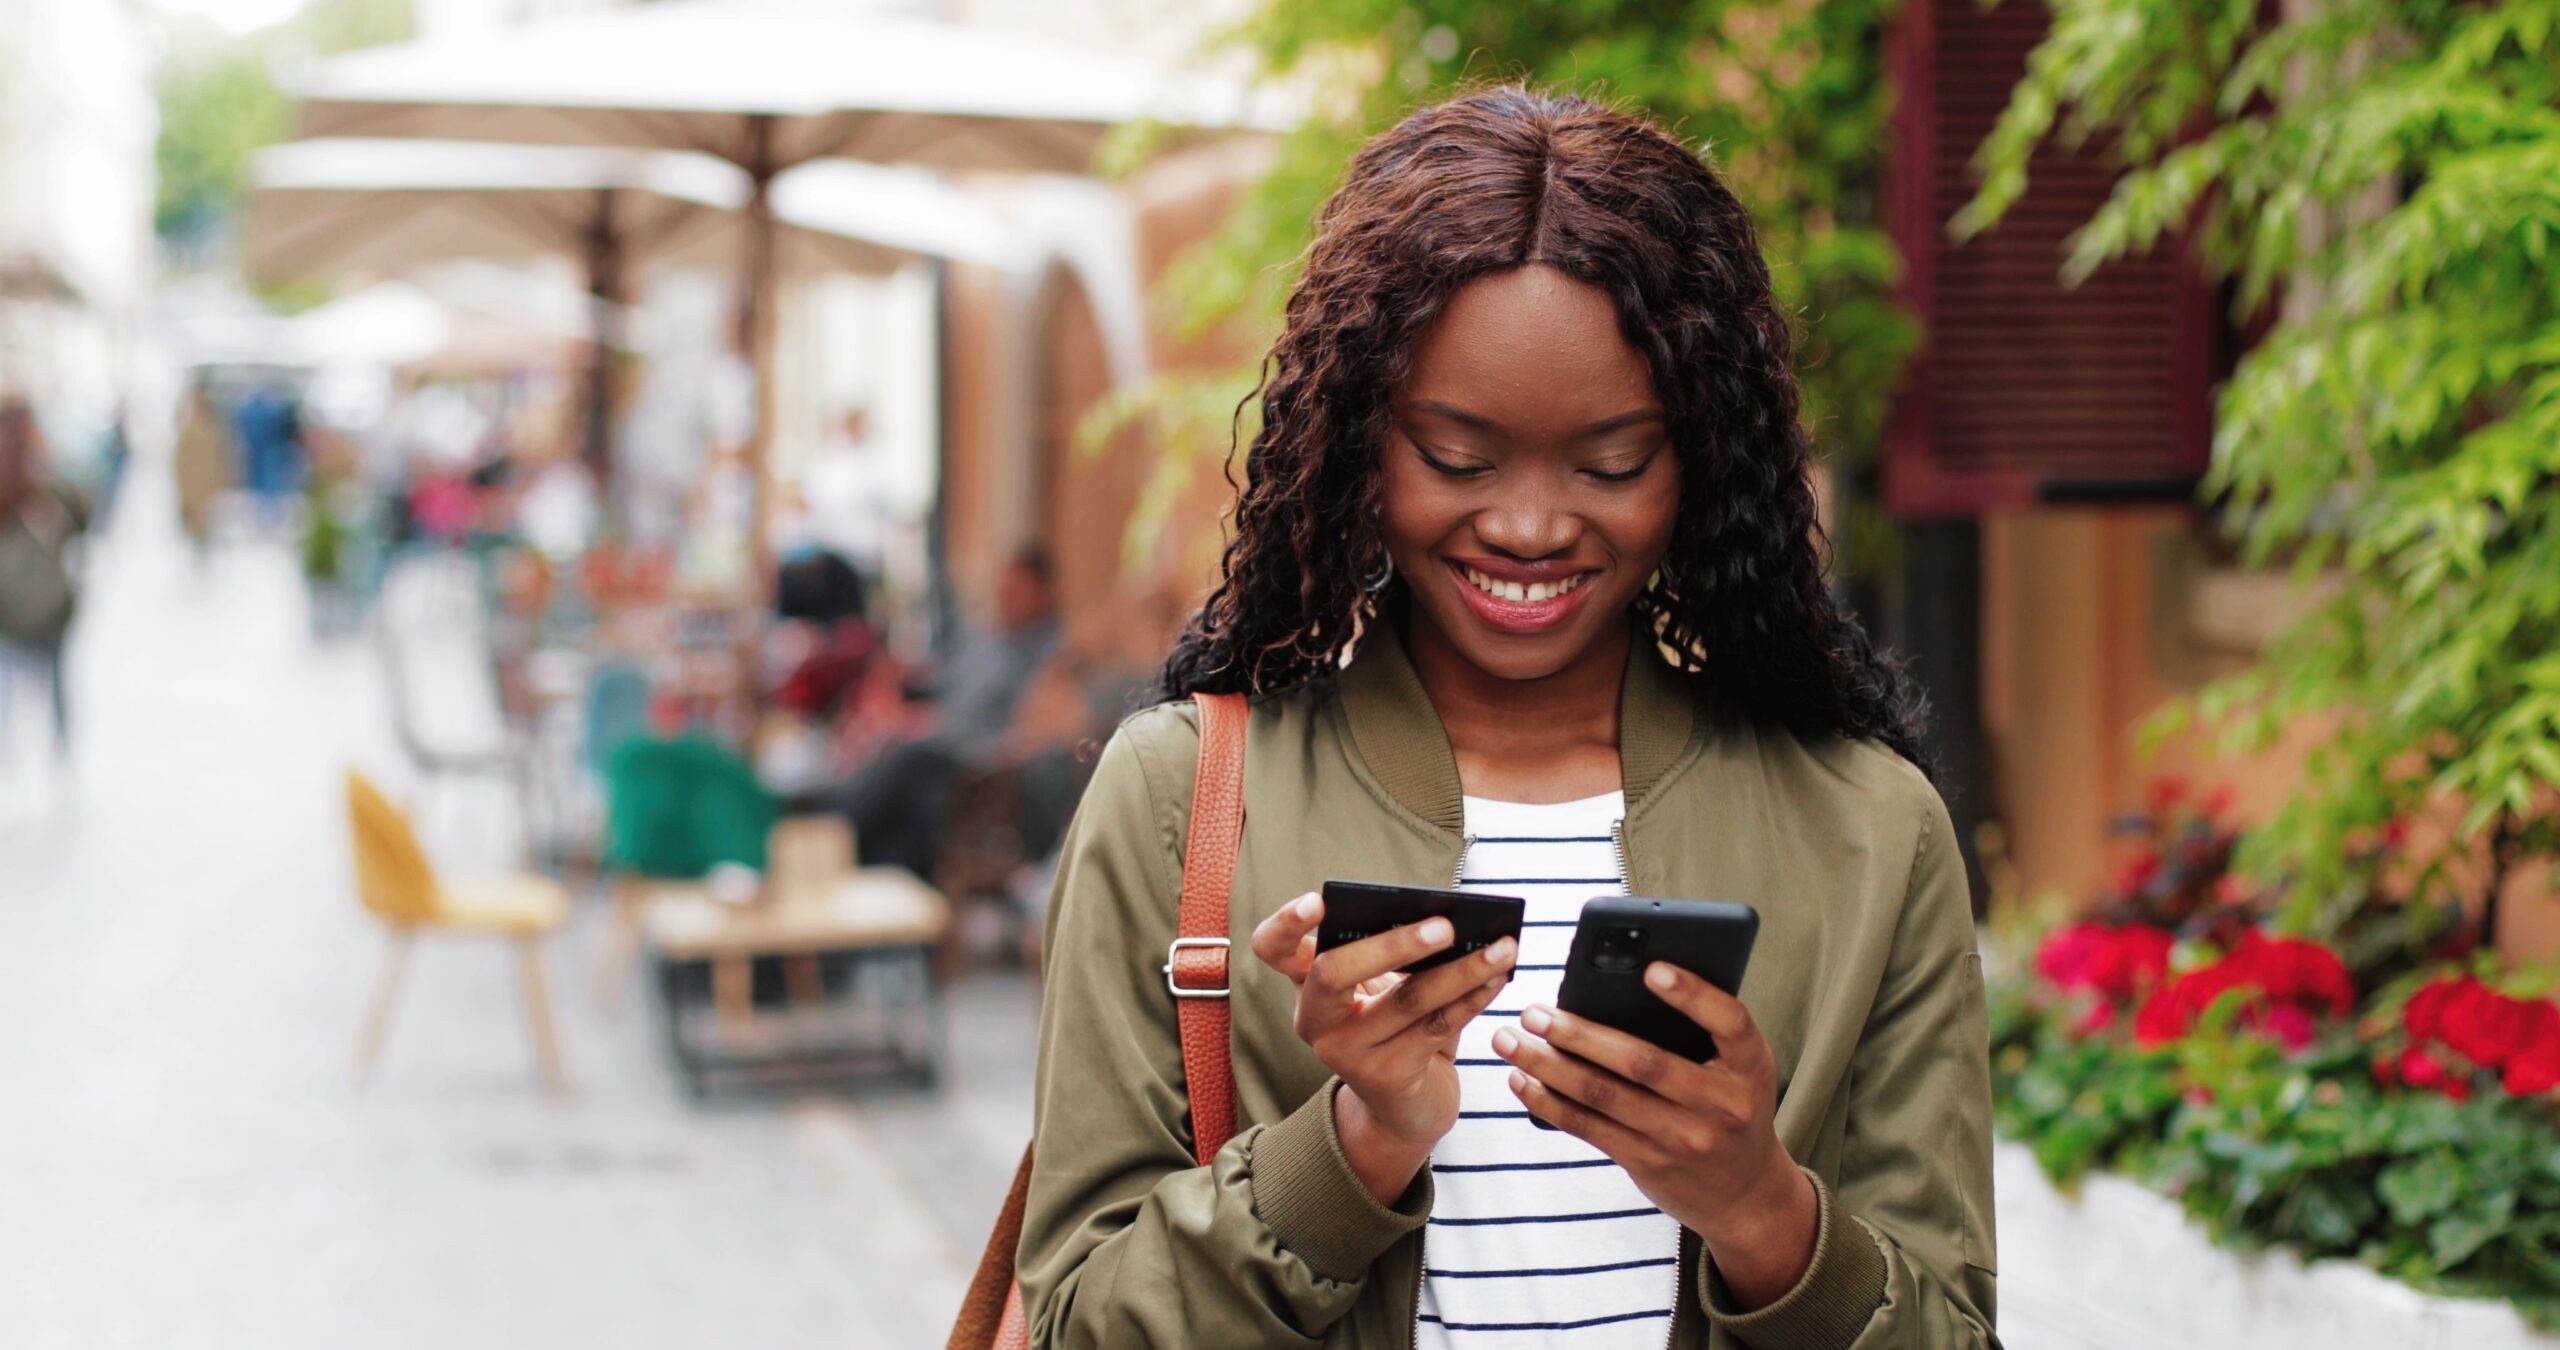 Online shopping. Waist up portrait view of African American woman holding credit card and typing details at her smartphone while having online shopping at the street